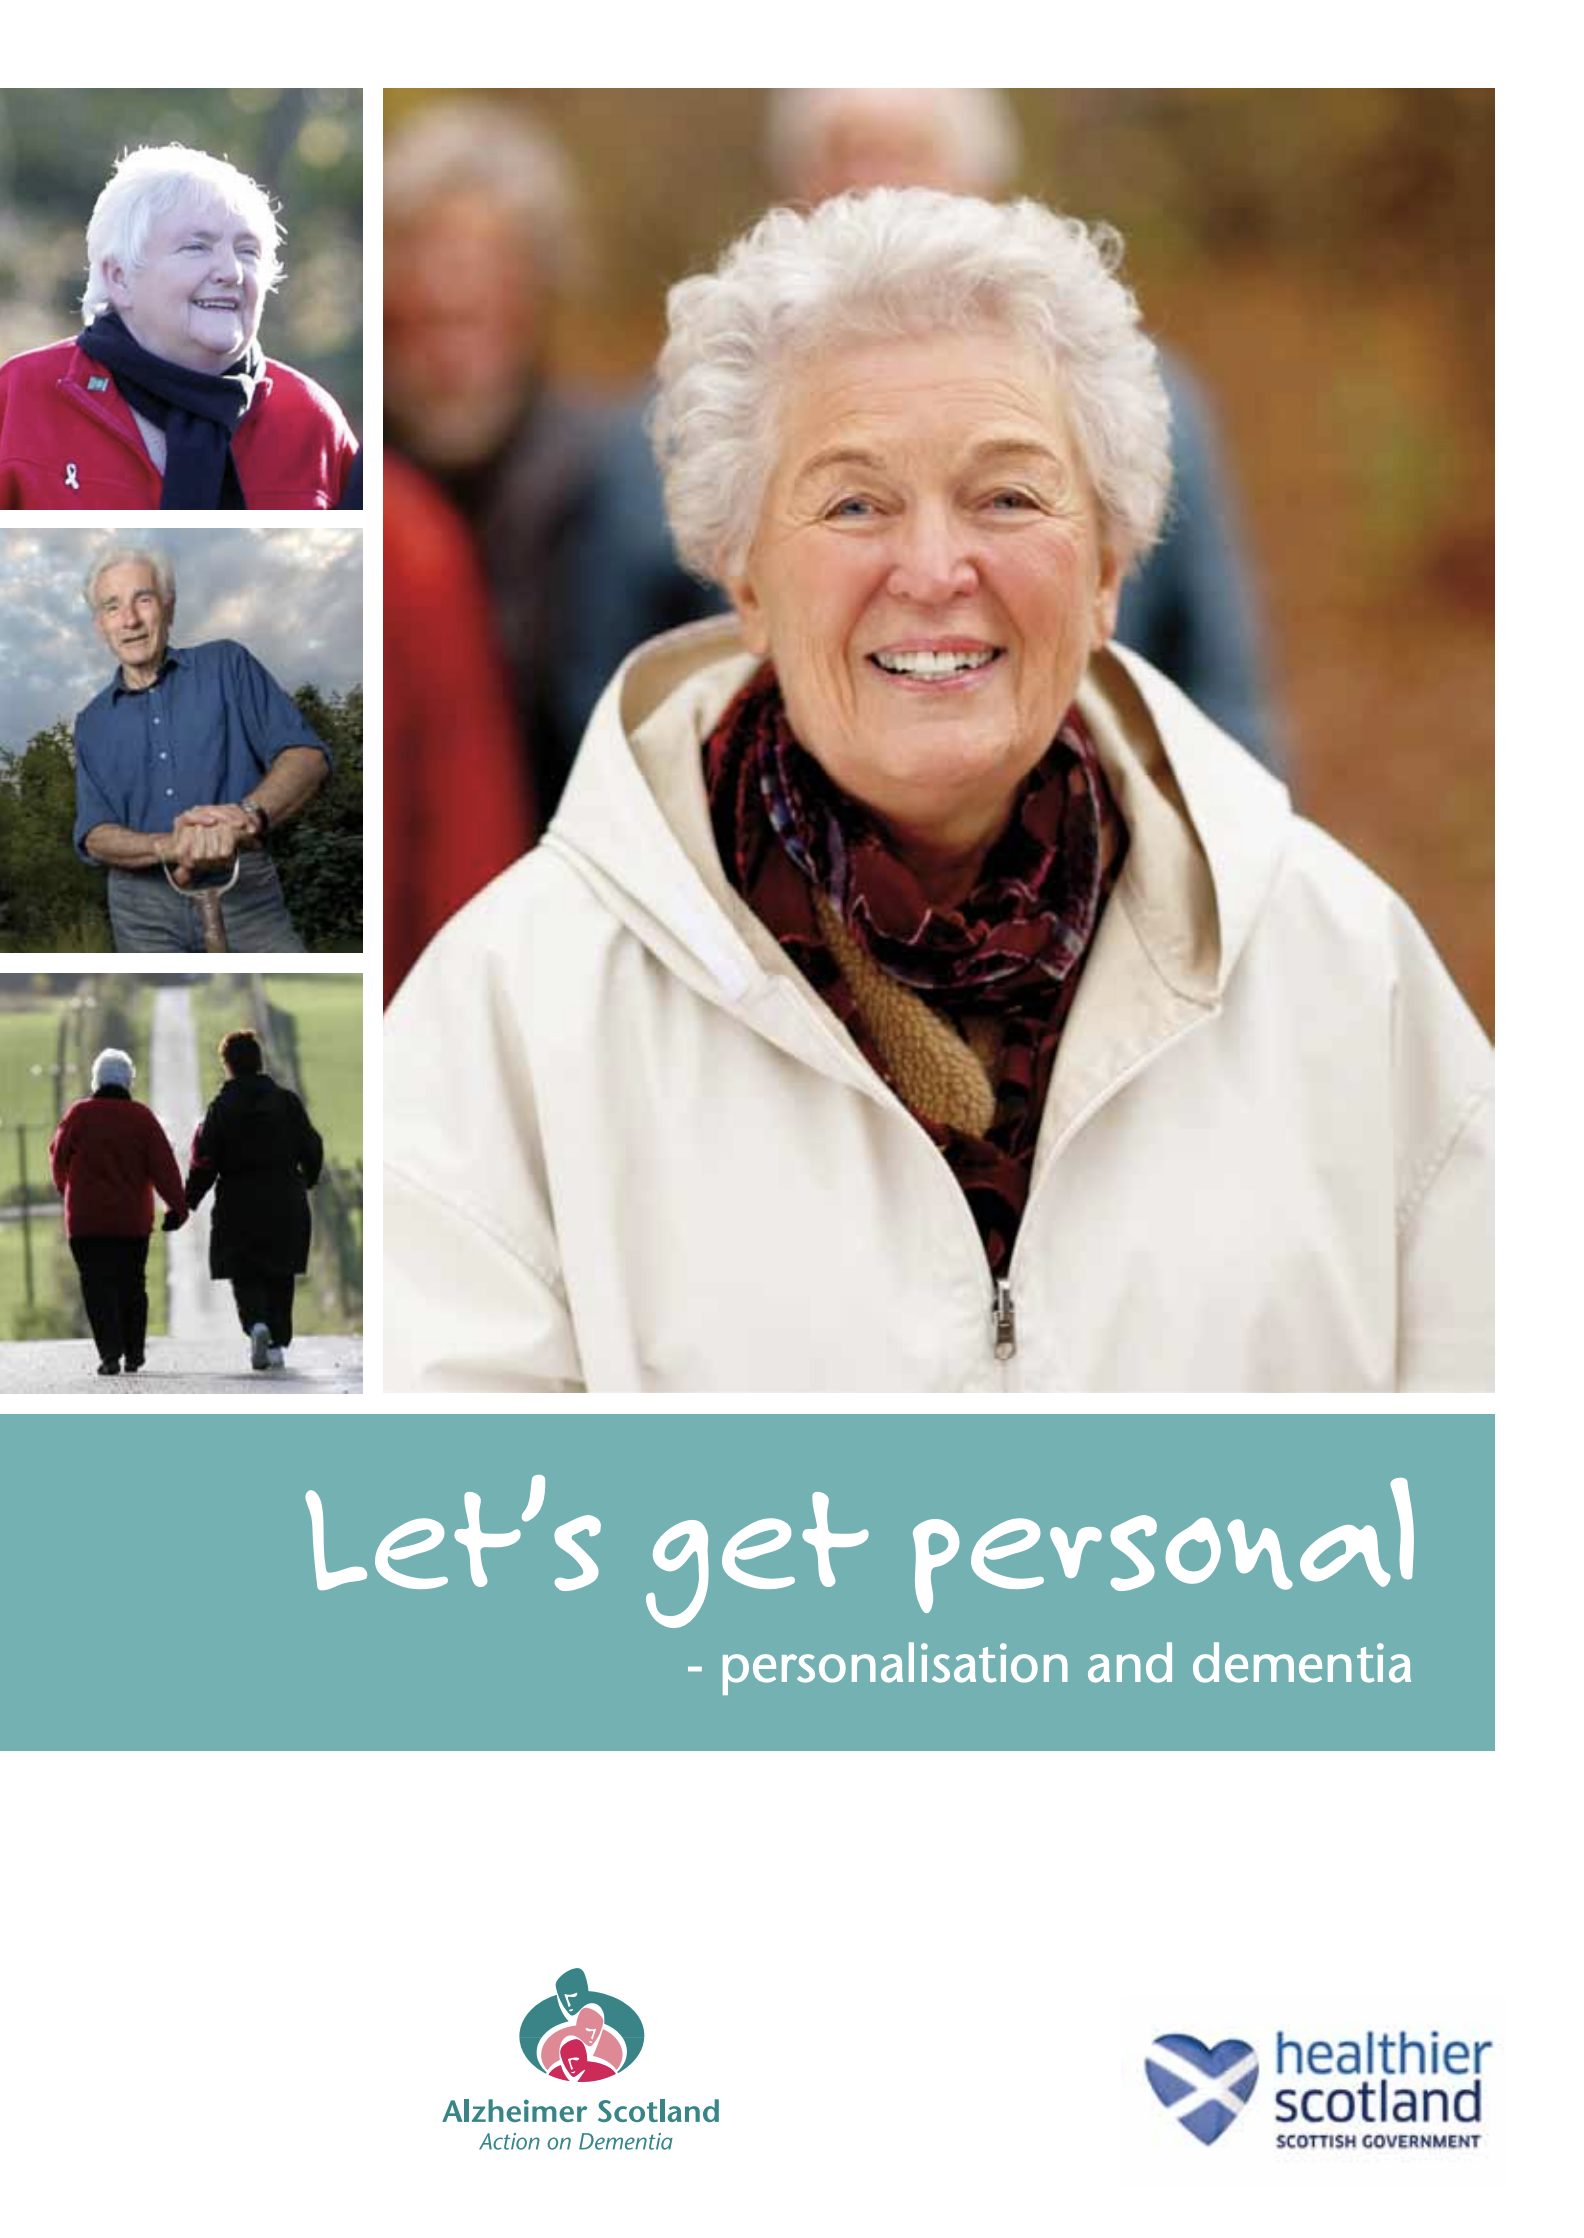 「Let’s get personal: personalisation and dementia」